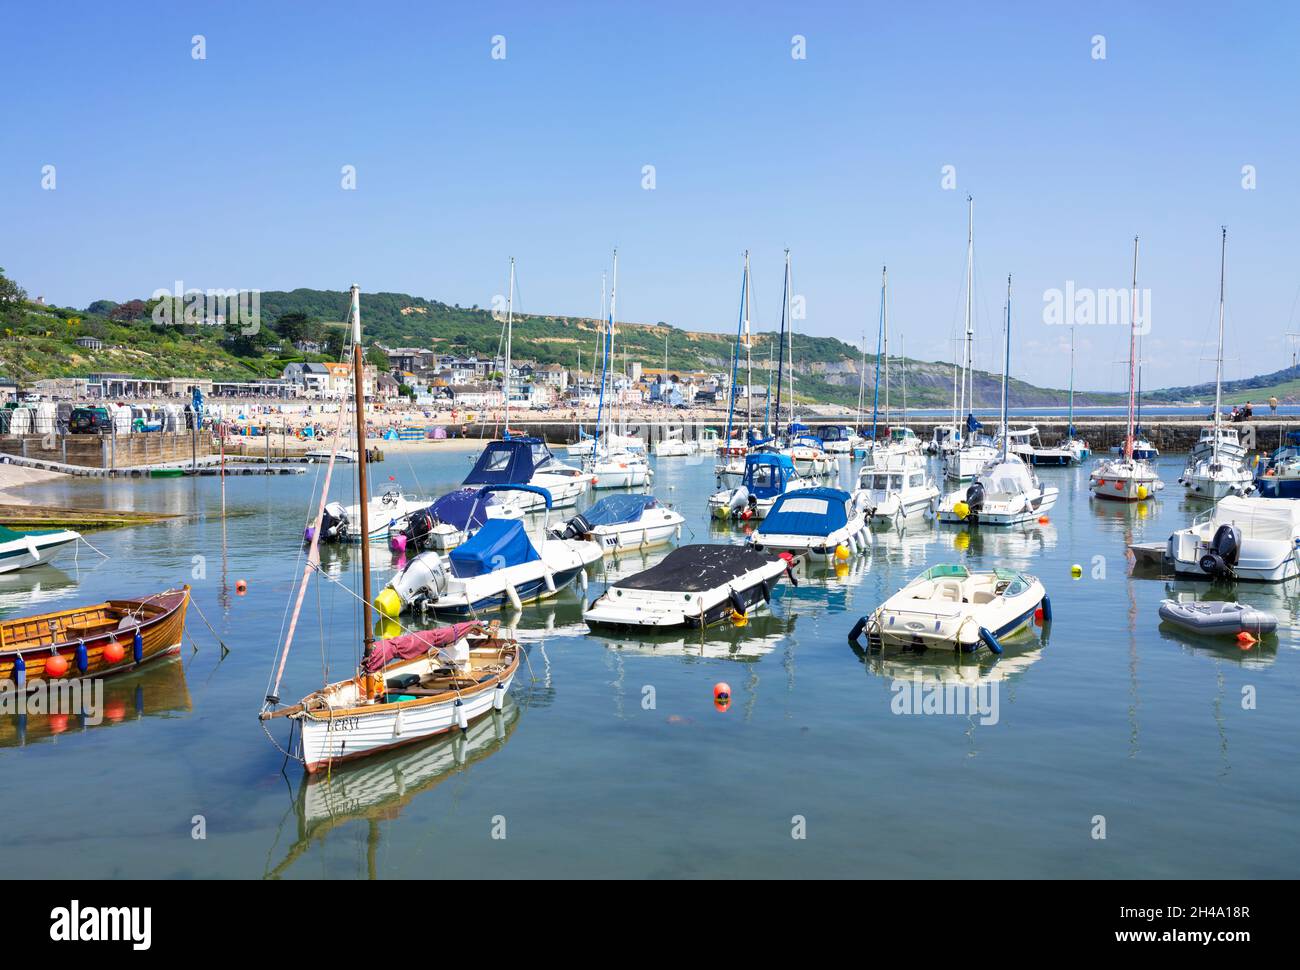 Fishing boats and Yachts in the Jurassic coast harbour at Lyme Regis Dorset England UK GB Europe Stock Photo